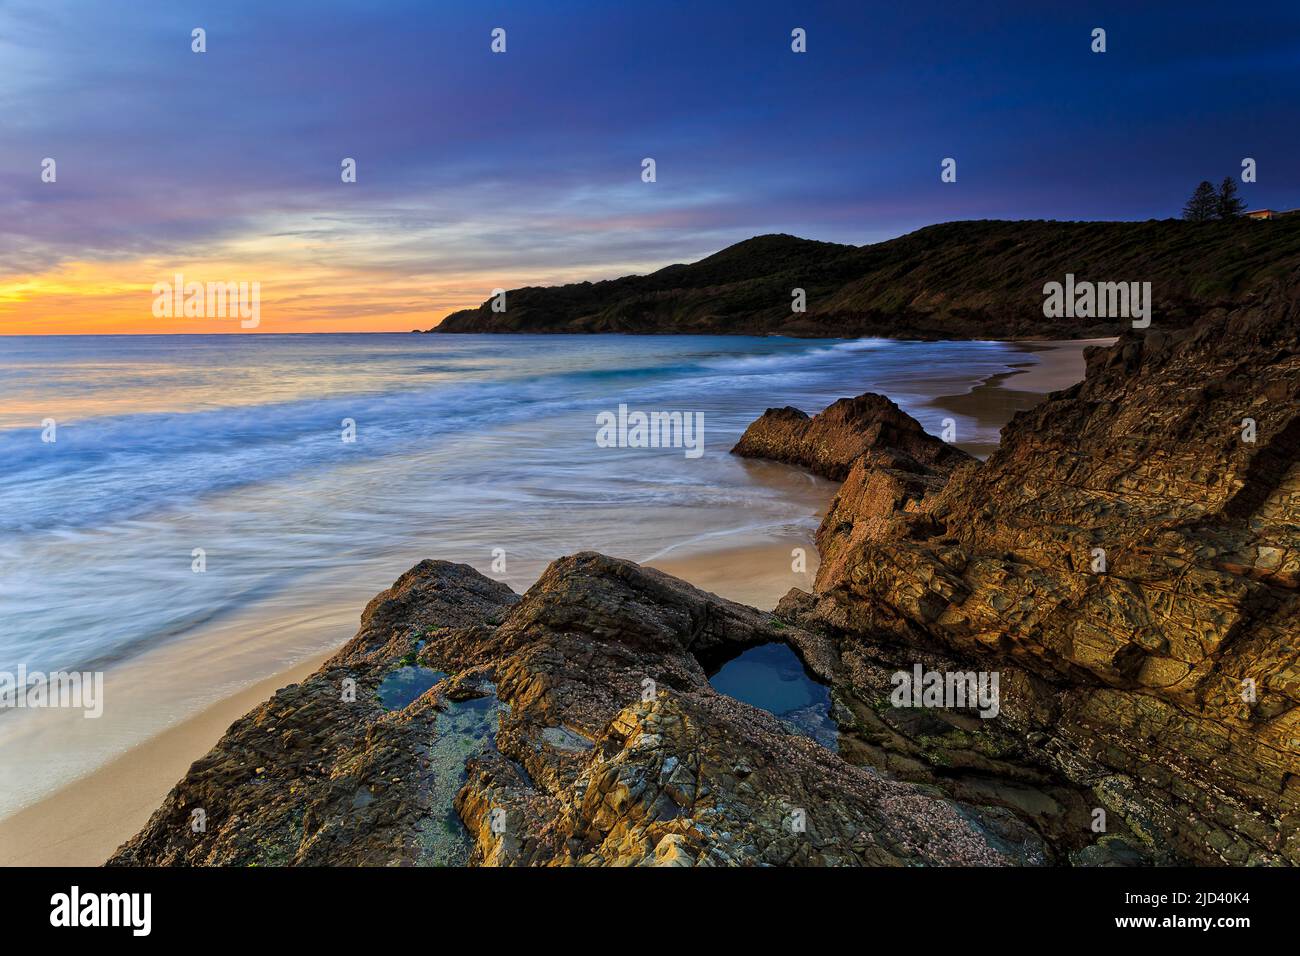 Scenic seascape off Burgess beach in Forster town on Mid North coast of Australian Pacific at sunrise. Stock Photo